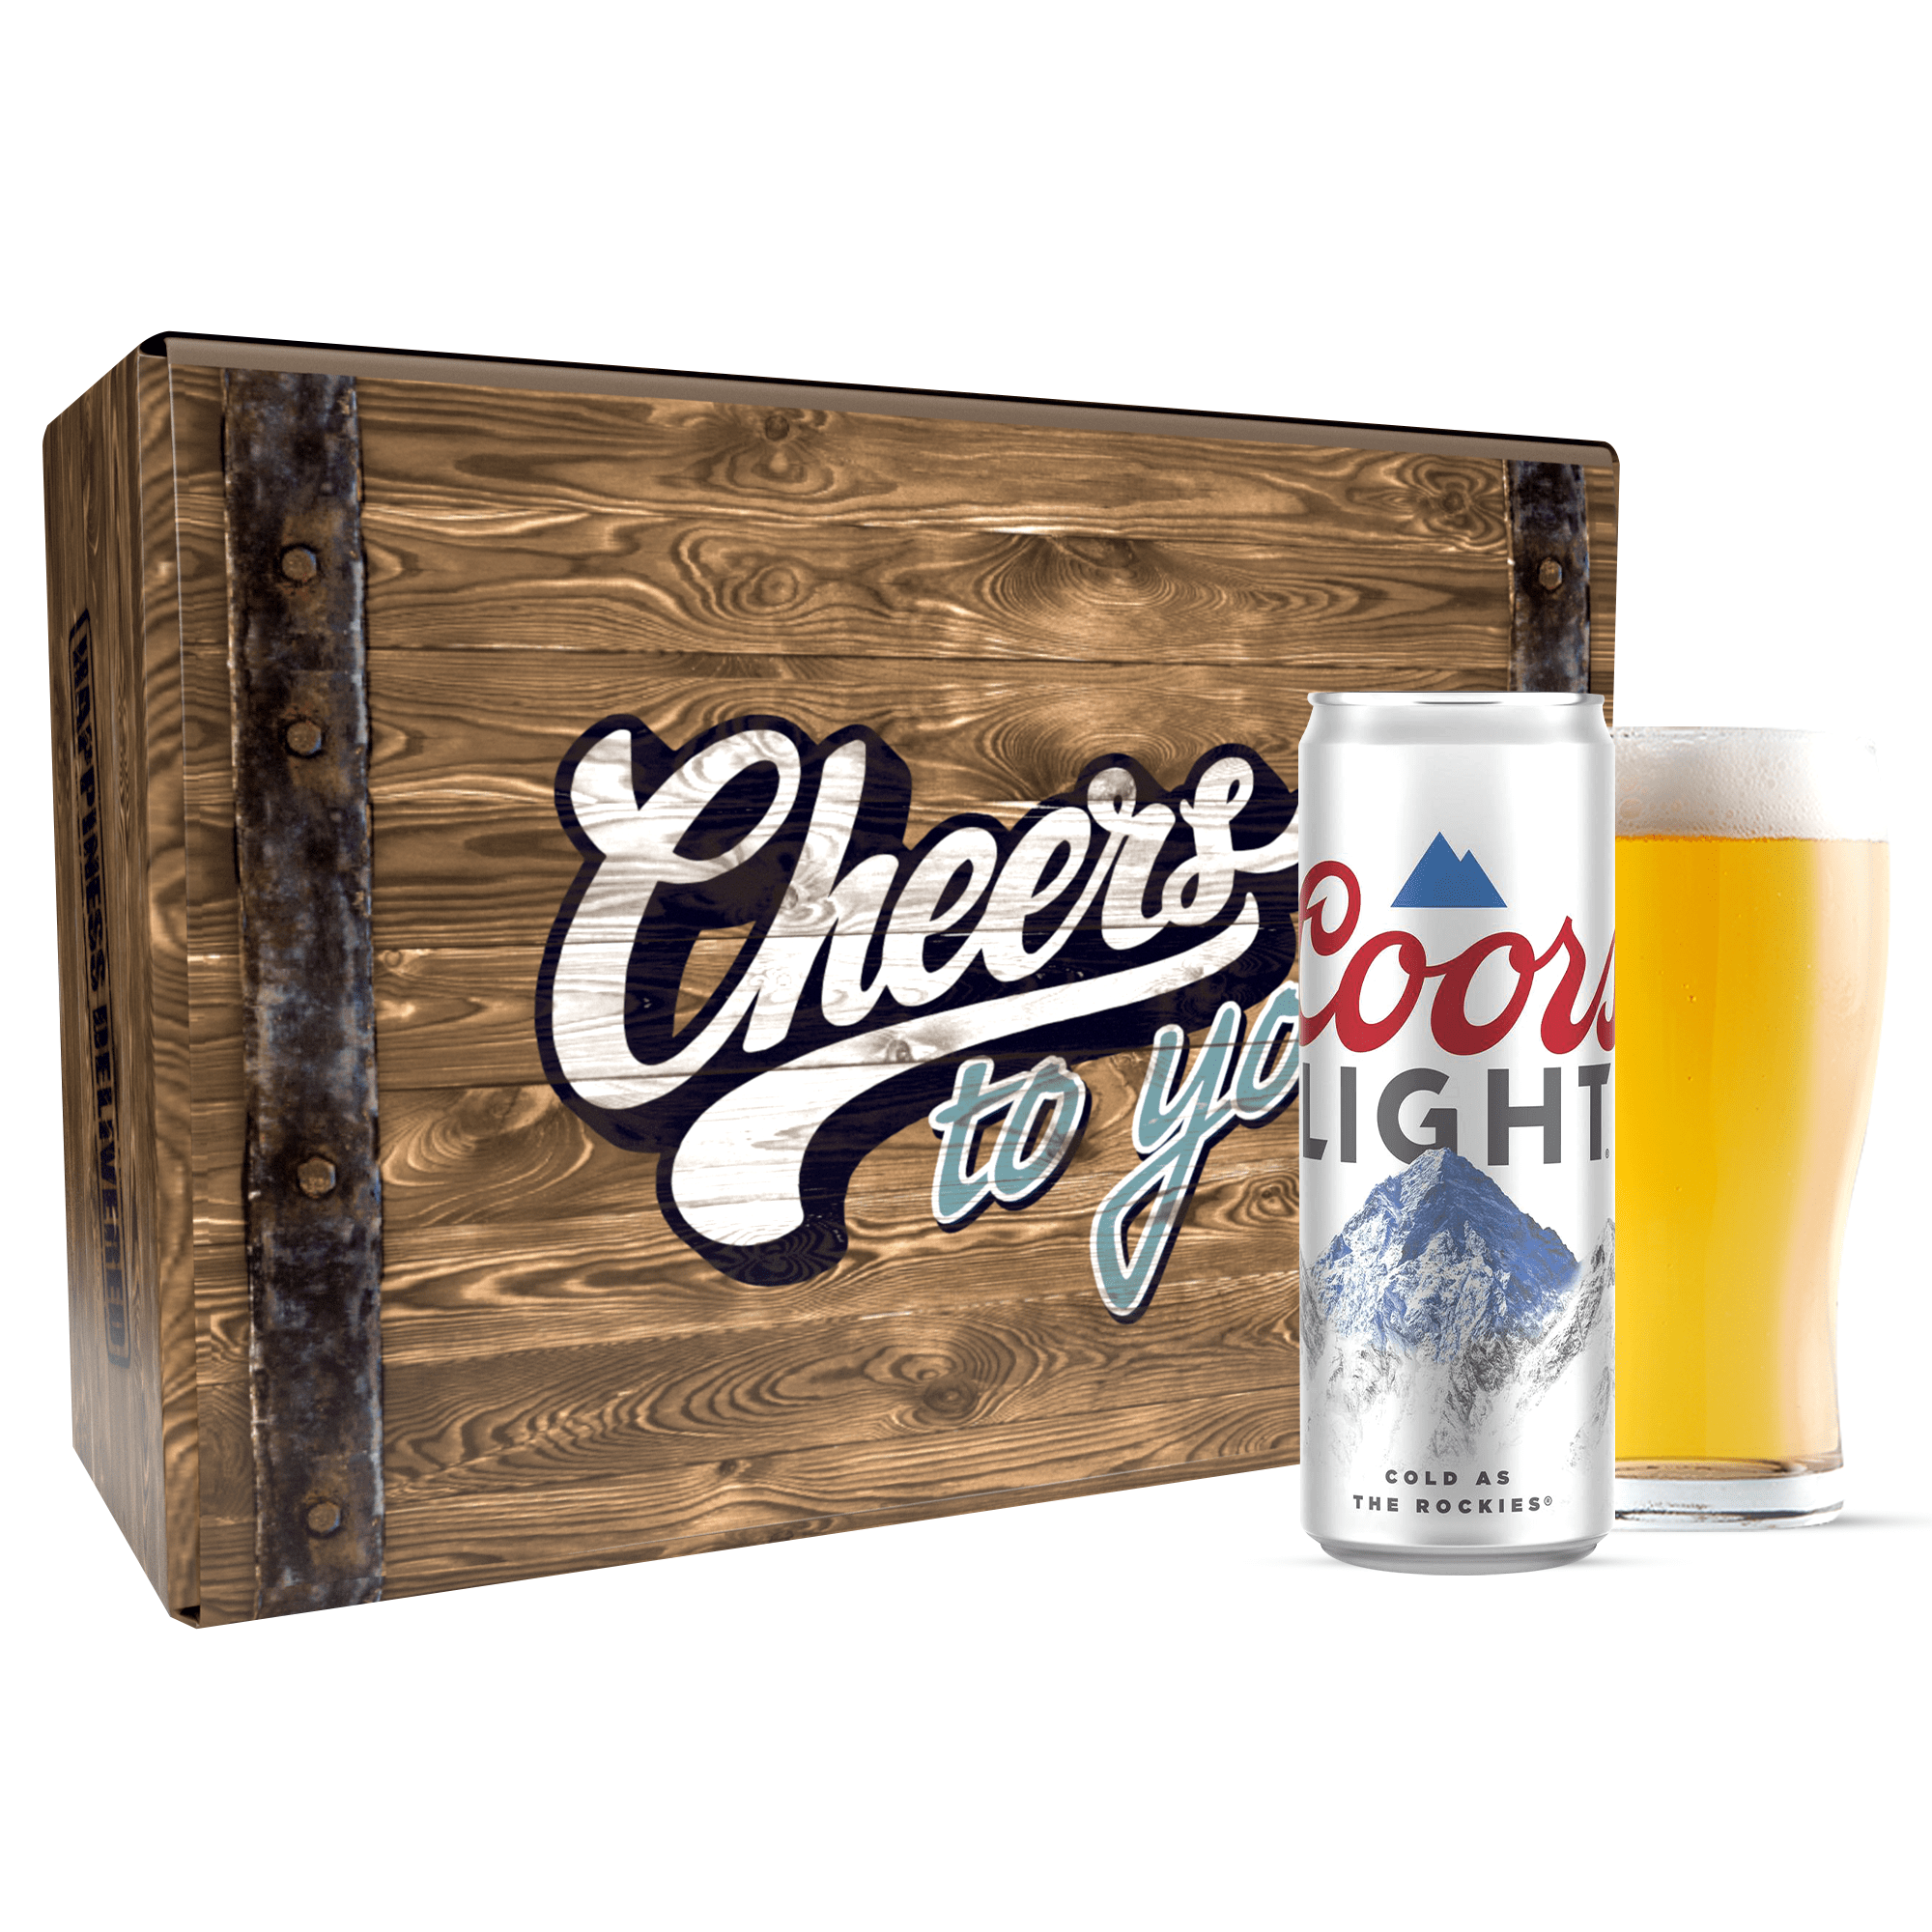 Coors Light - 24 Pack Beer Gift